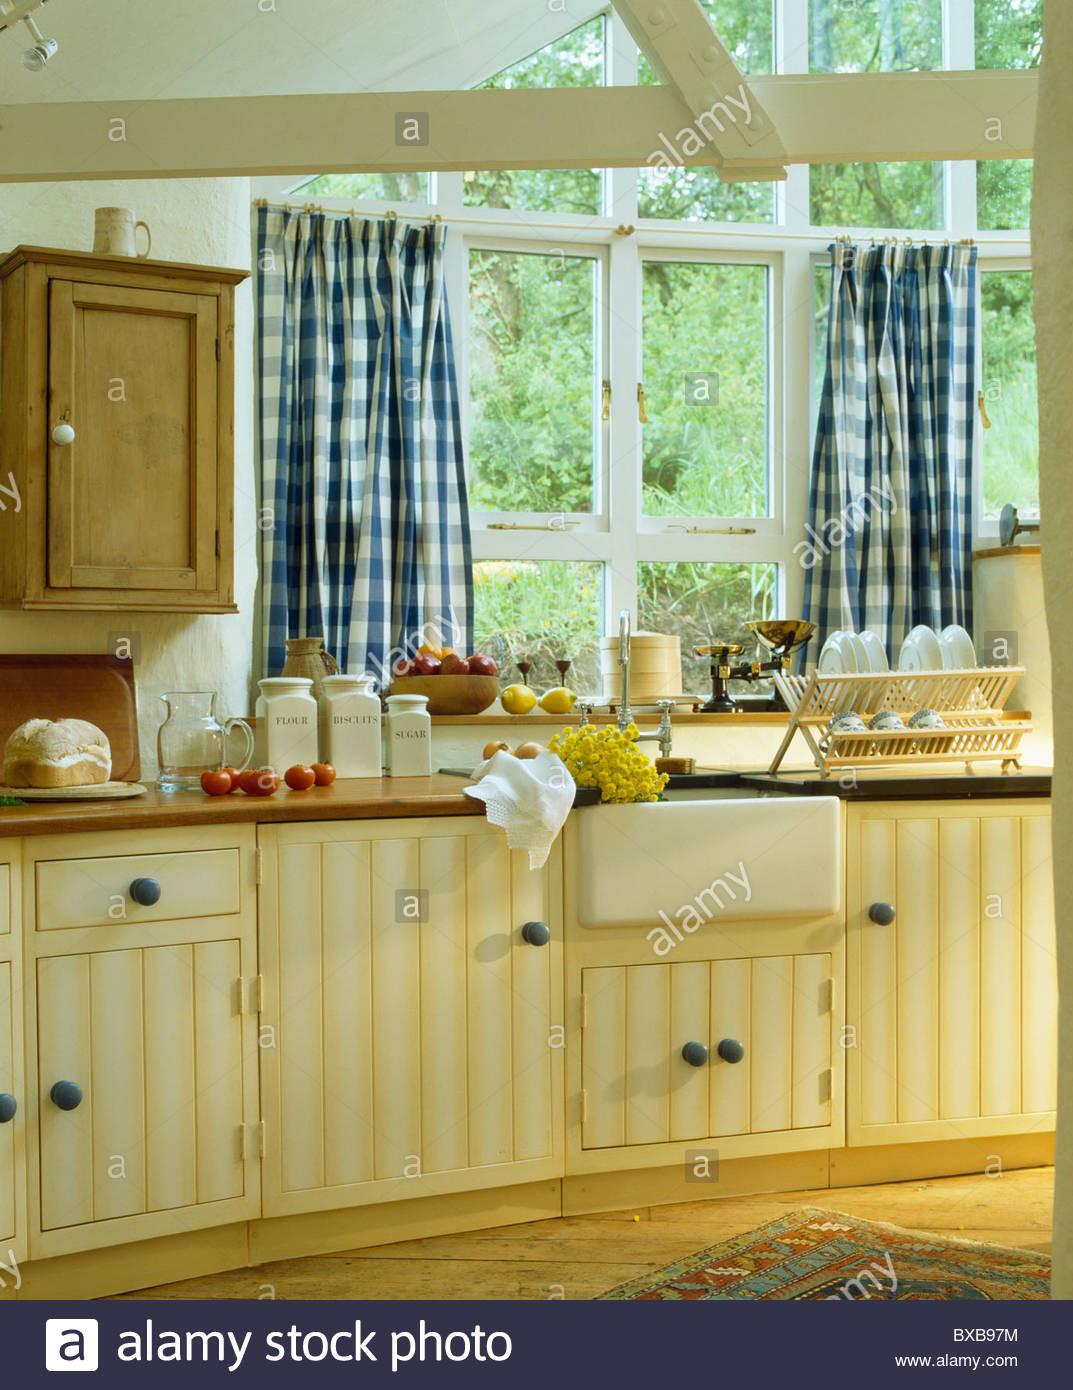 Blue And Yellow Kitchen Curtains
 Blue white checked curtains on window above sink in